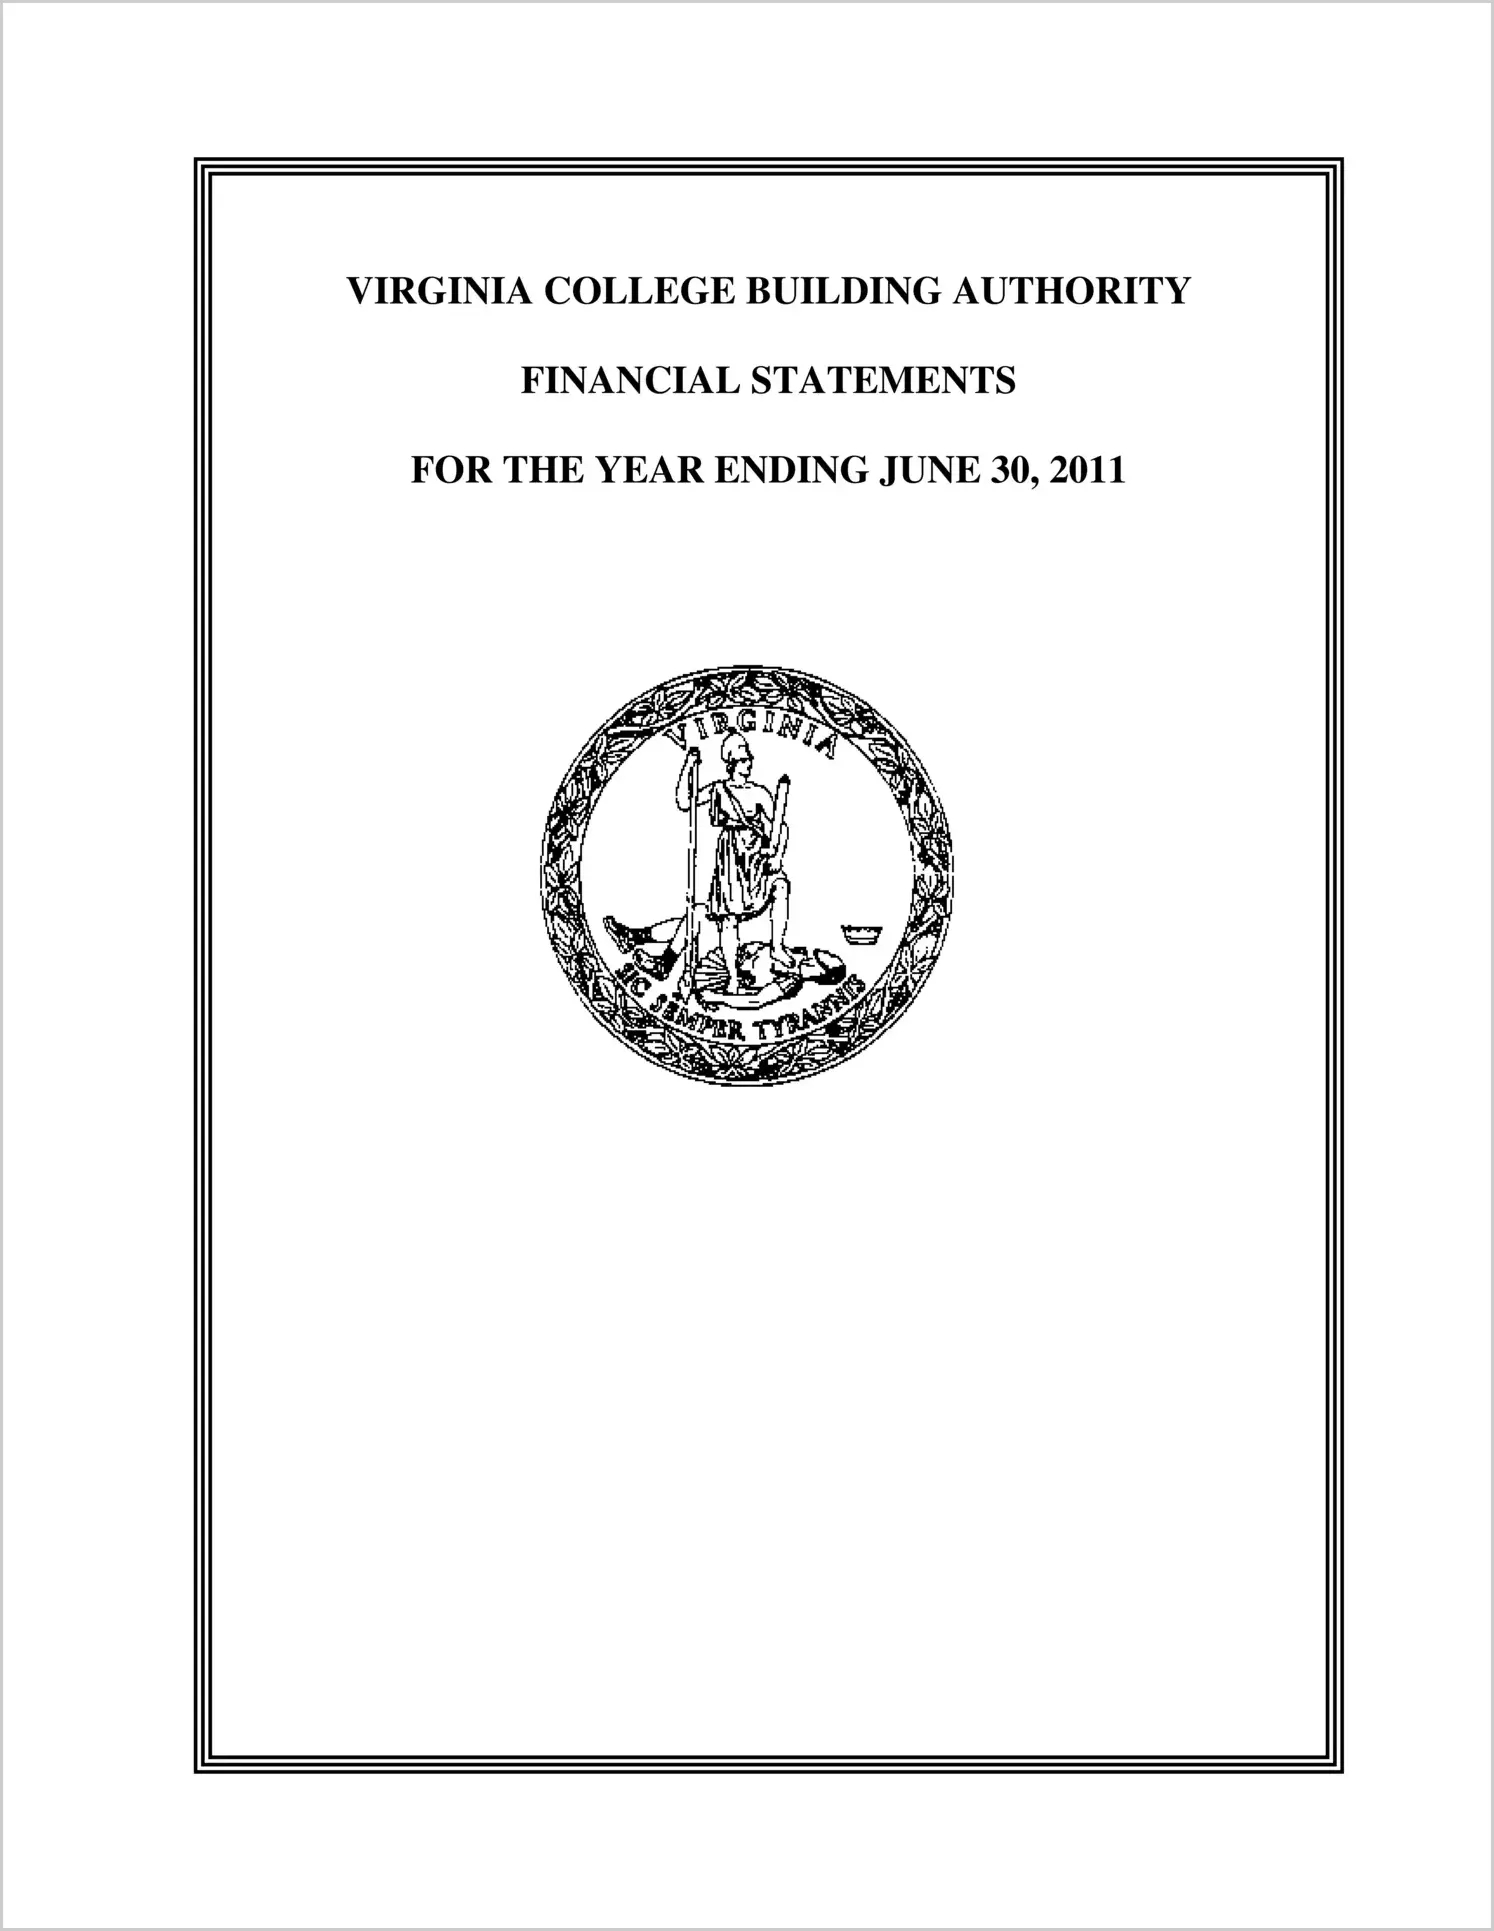 Virginia College Building Authority for the year ended June 30, 2011